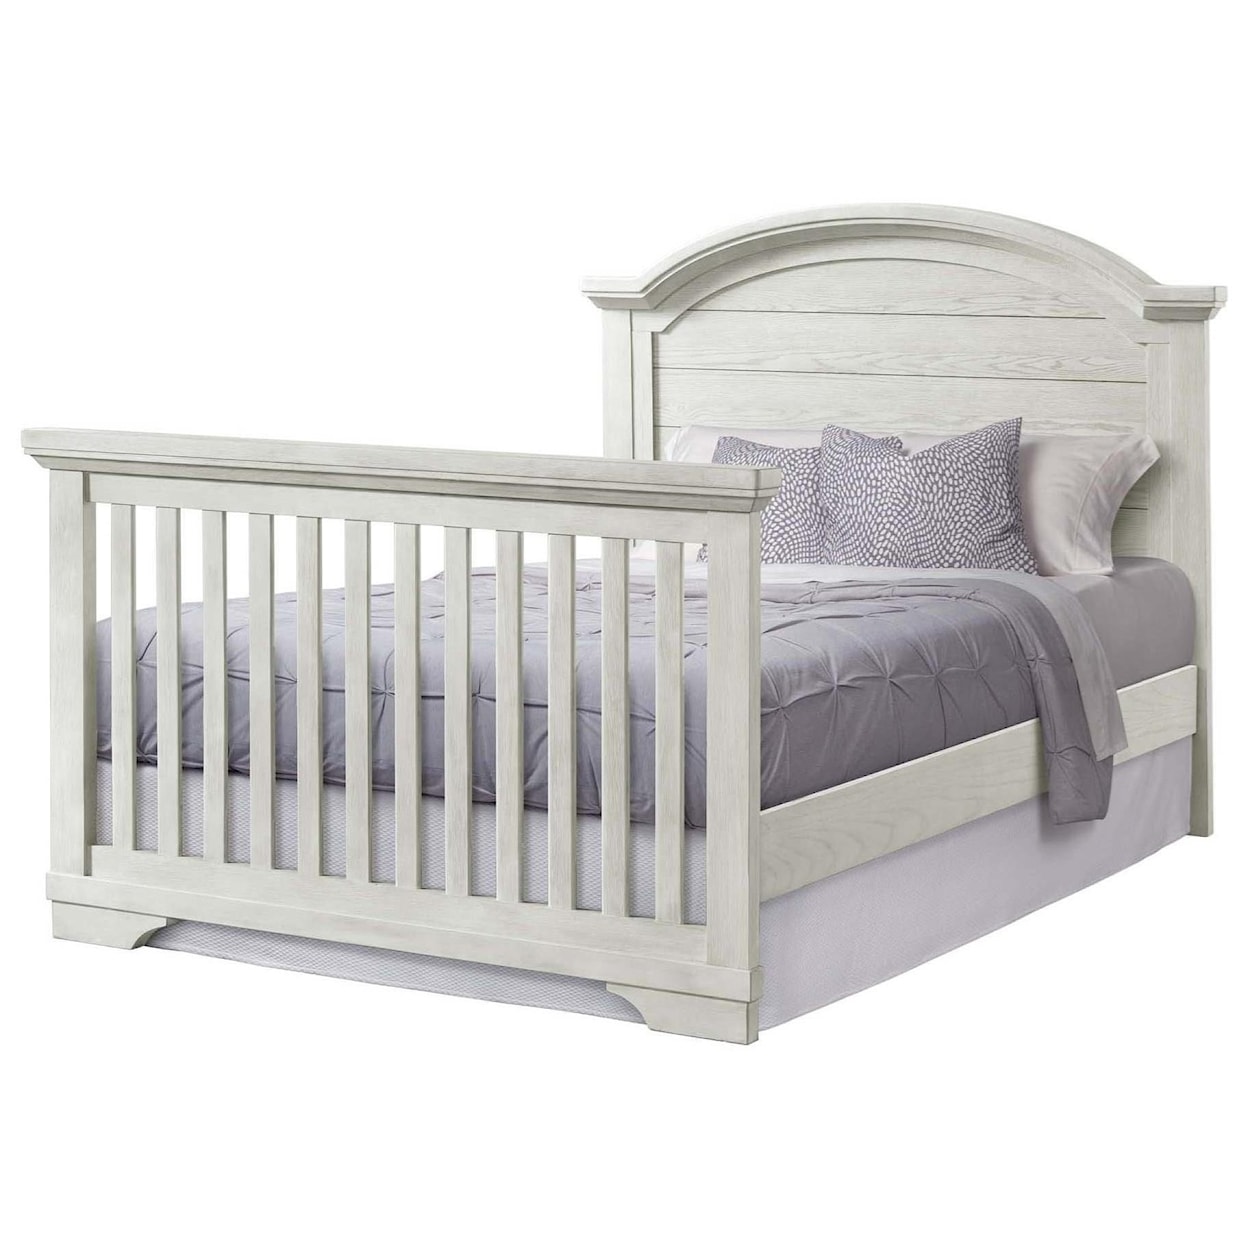 Westwood Design Foundry Arch Top Convertible Crib